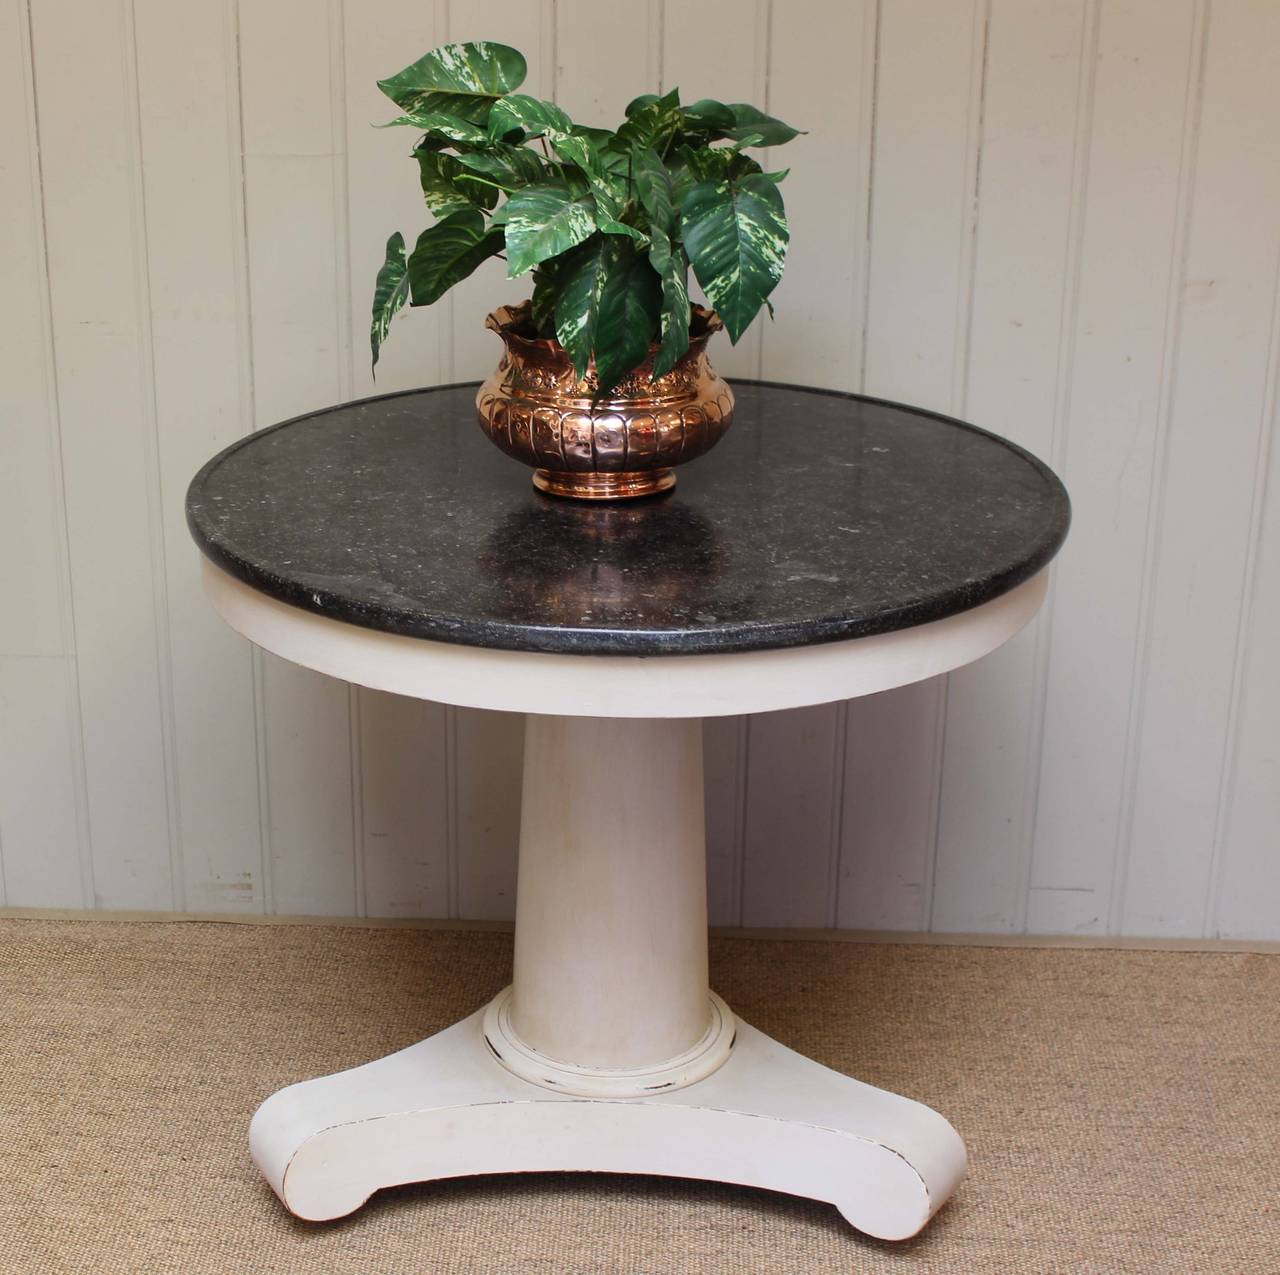 Painted central table having a substantial pedestal painted base with a polished granite top.